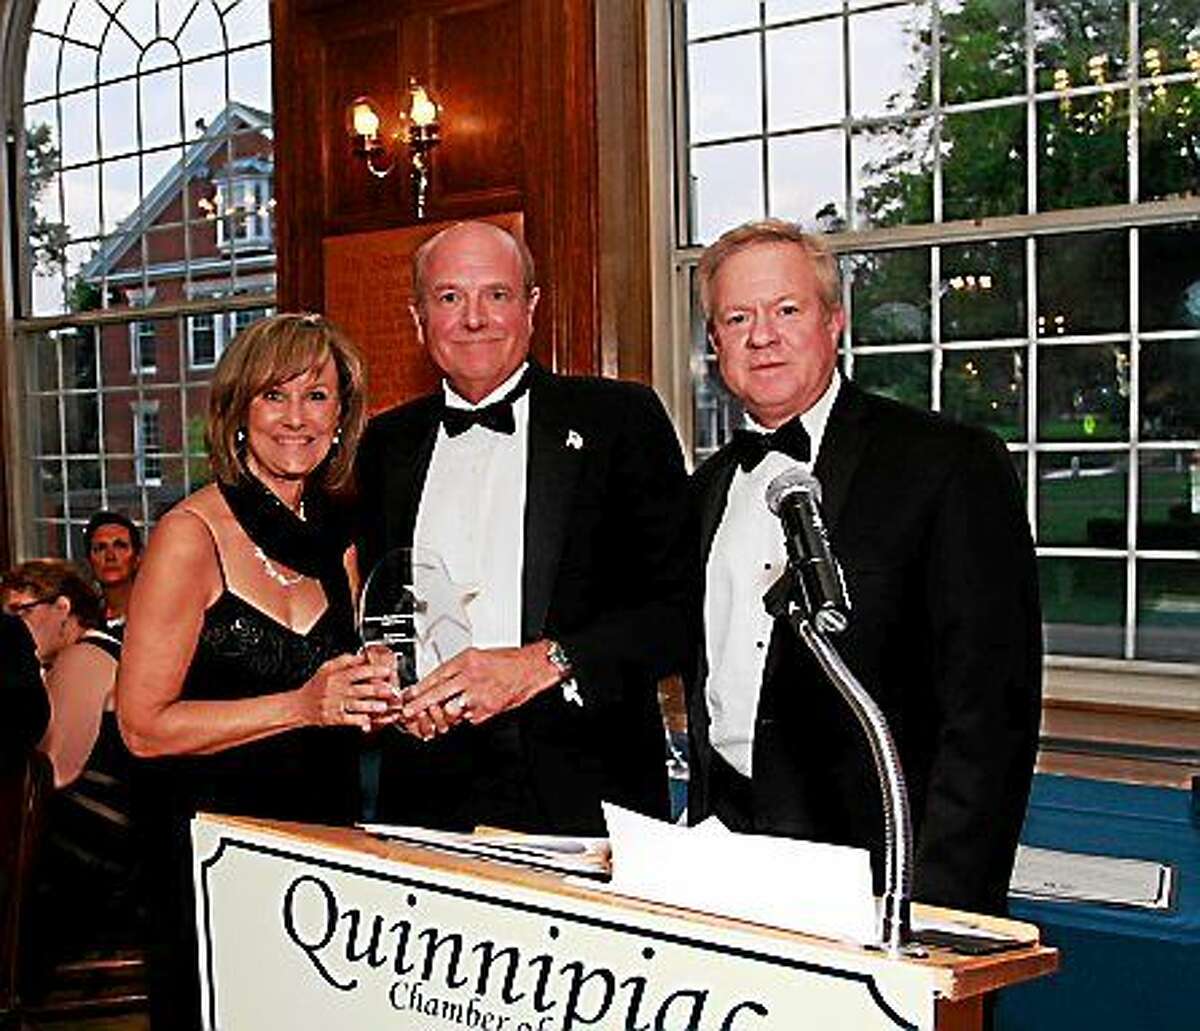 CONTRIBUTED PHOTO From left, Dee Prior Nesti, executive director of the Quinnipiac Chamber of Commerce; Chris Ulbrich, CEO of Ulbrich Stainless Steels; and Tom Curtin, corporate director, Human Resources, at the Centennial Celebration Gala.